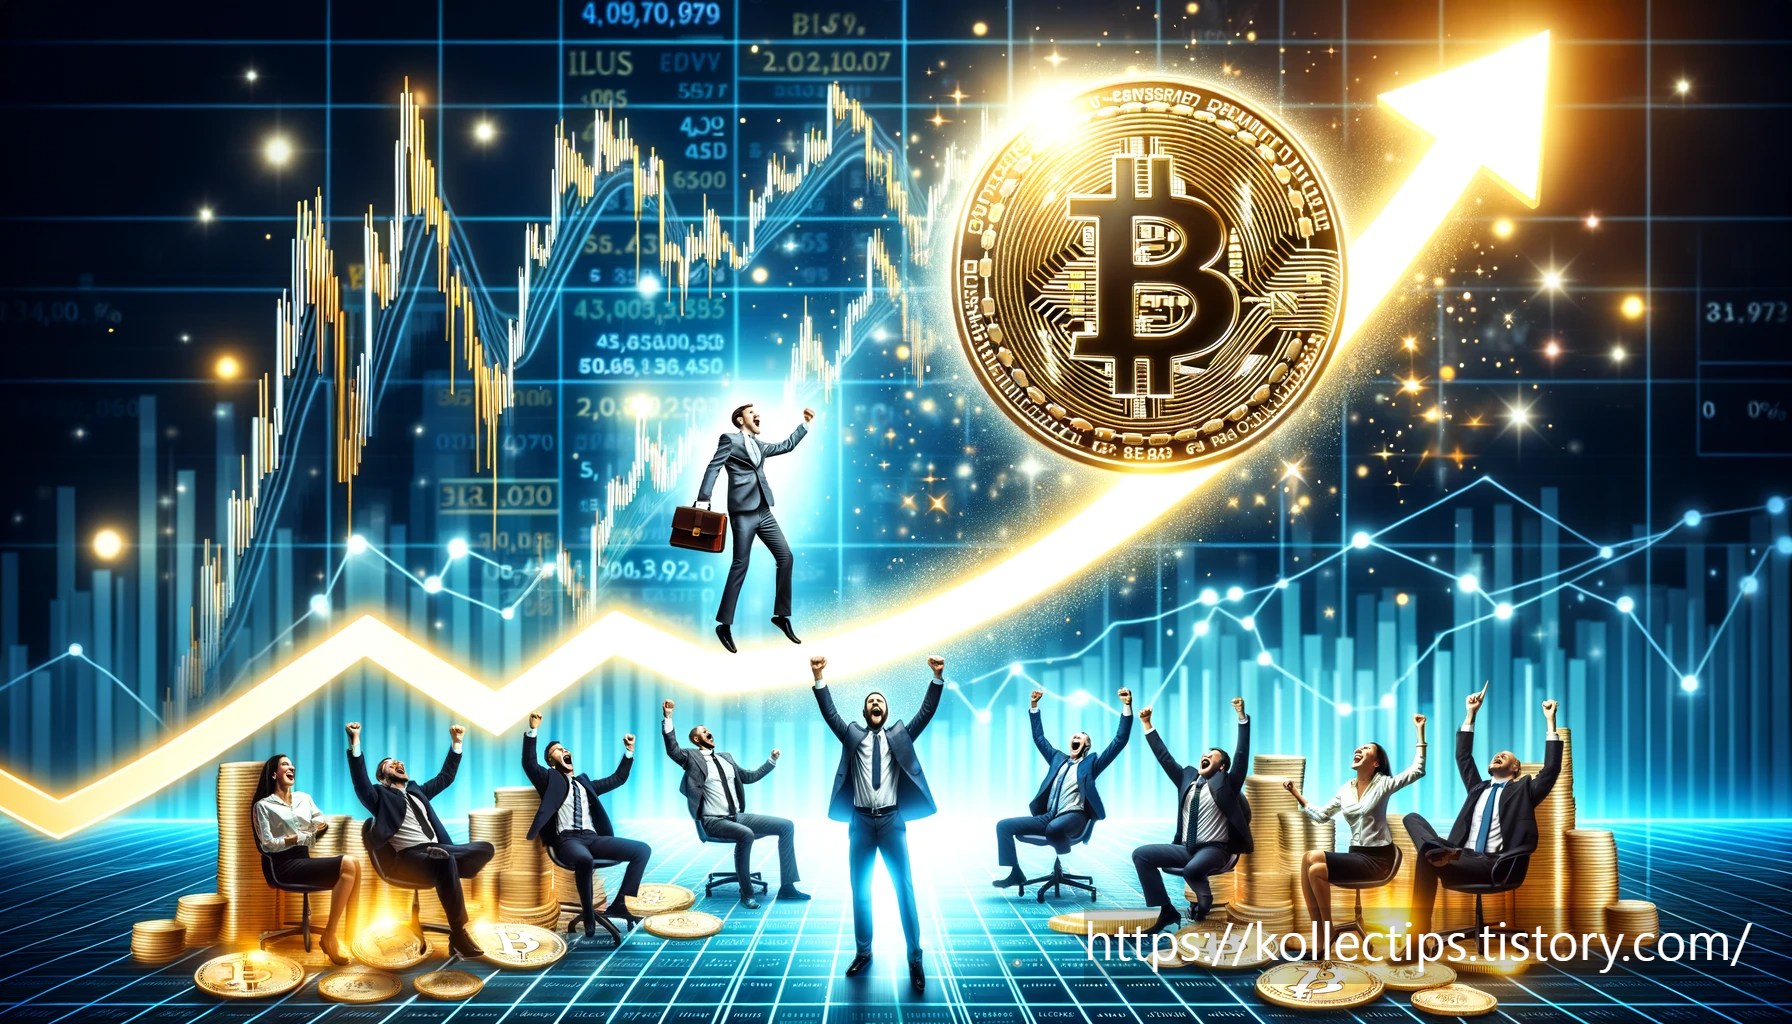 BITCOIN ETF LISTING ON UPTREND